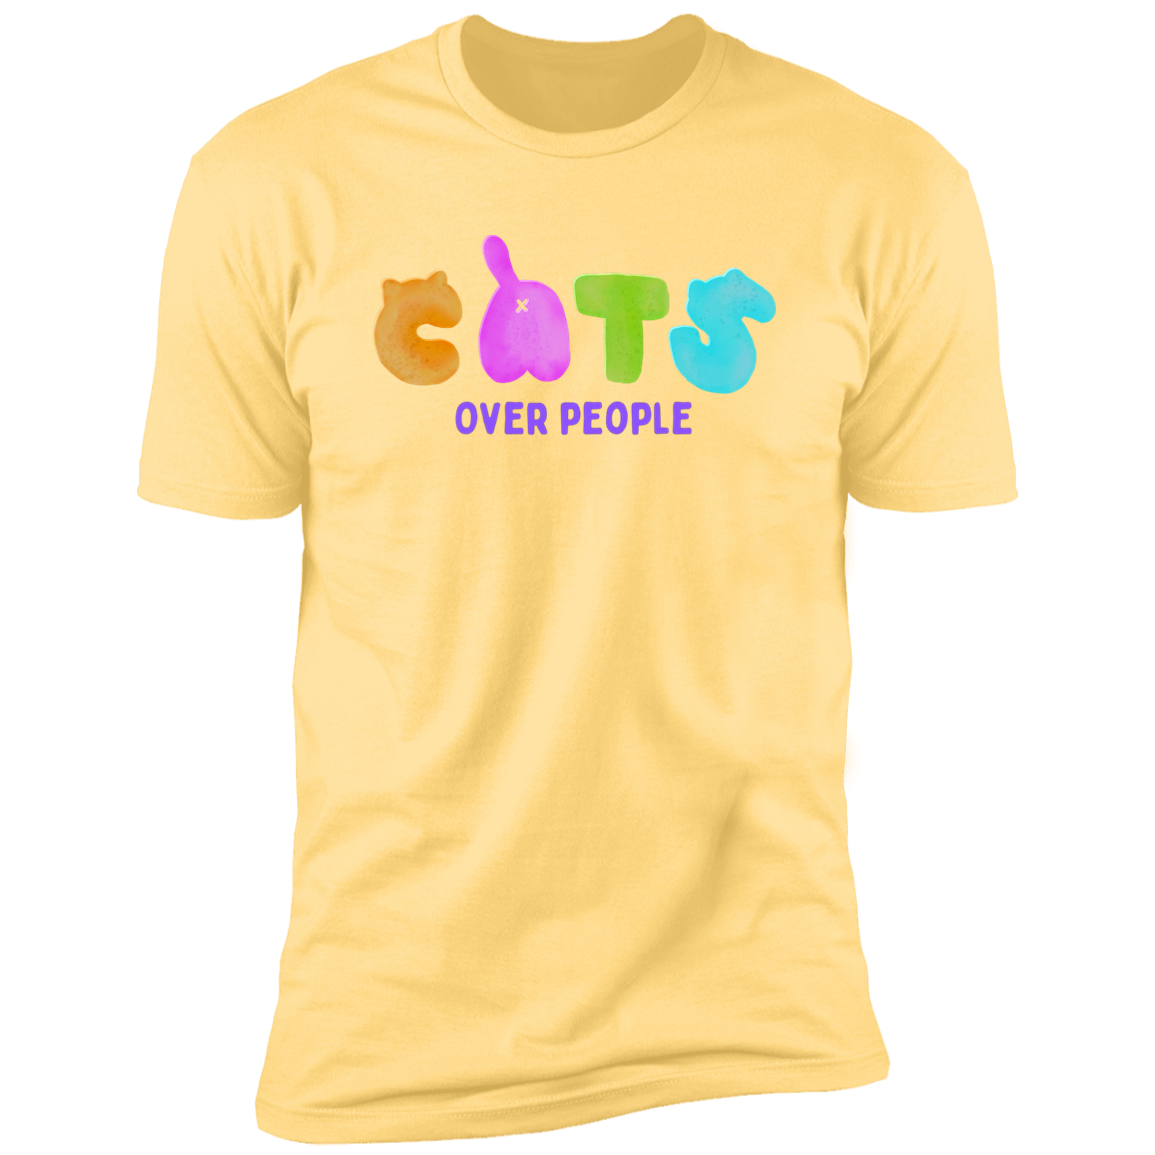 Cats Over People T-shirt, Cat Shirt for humans, in banana cream